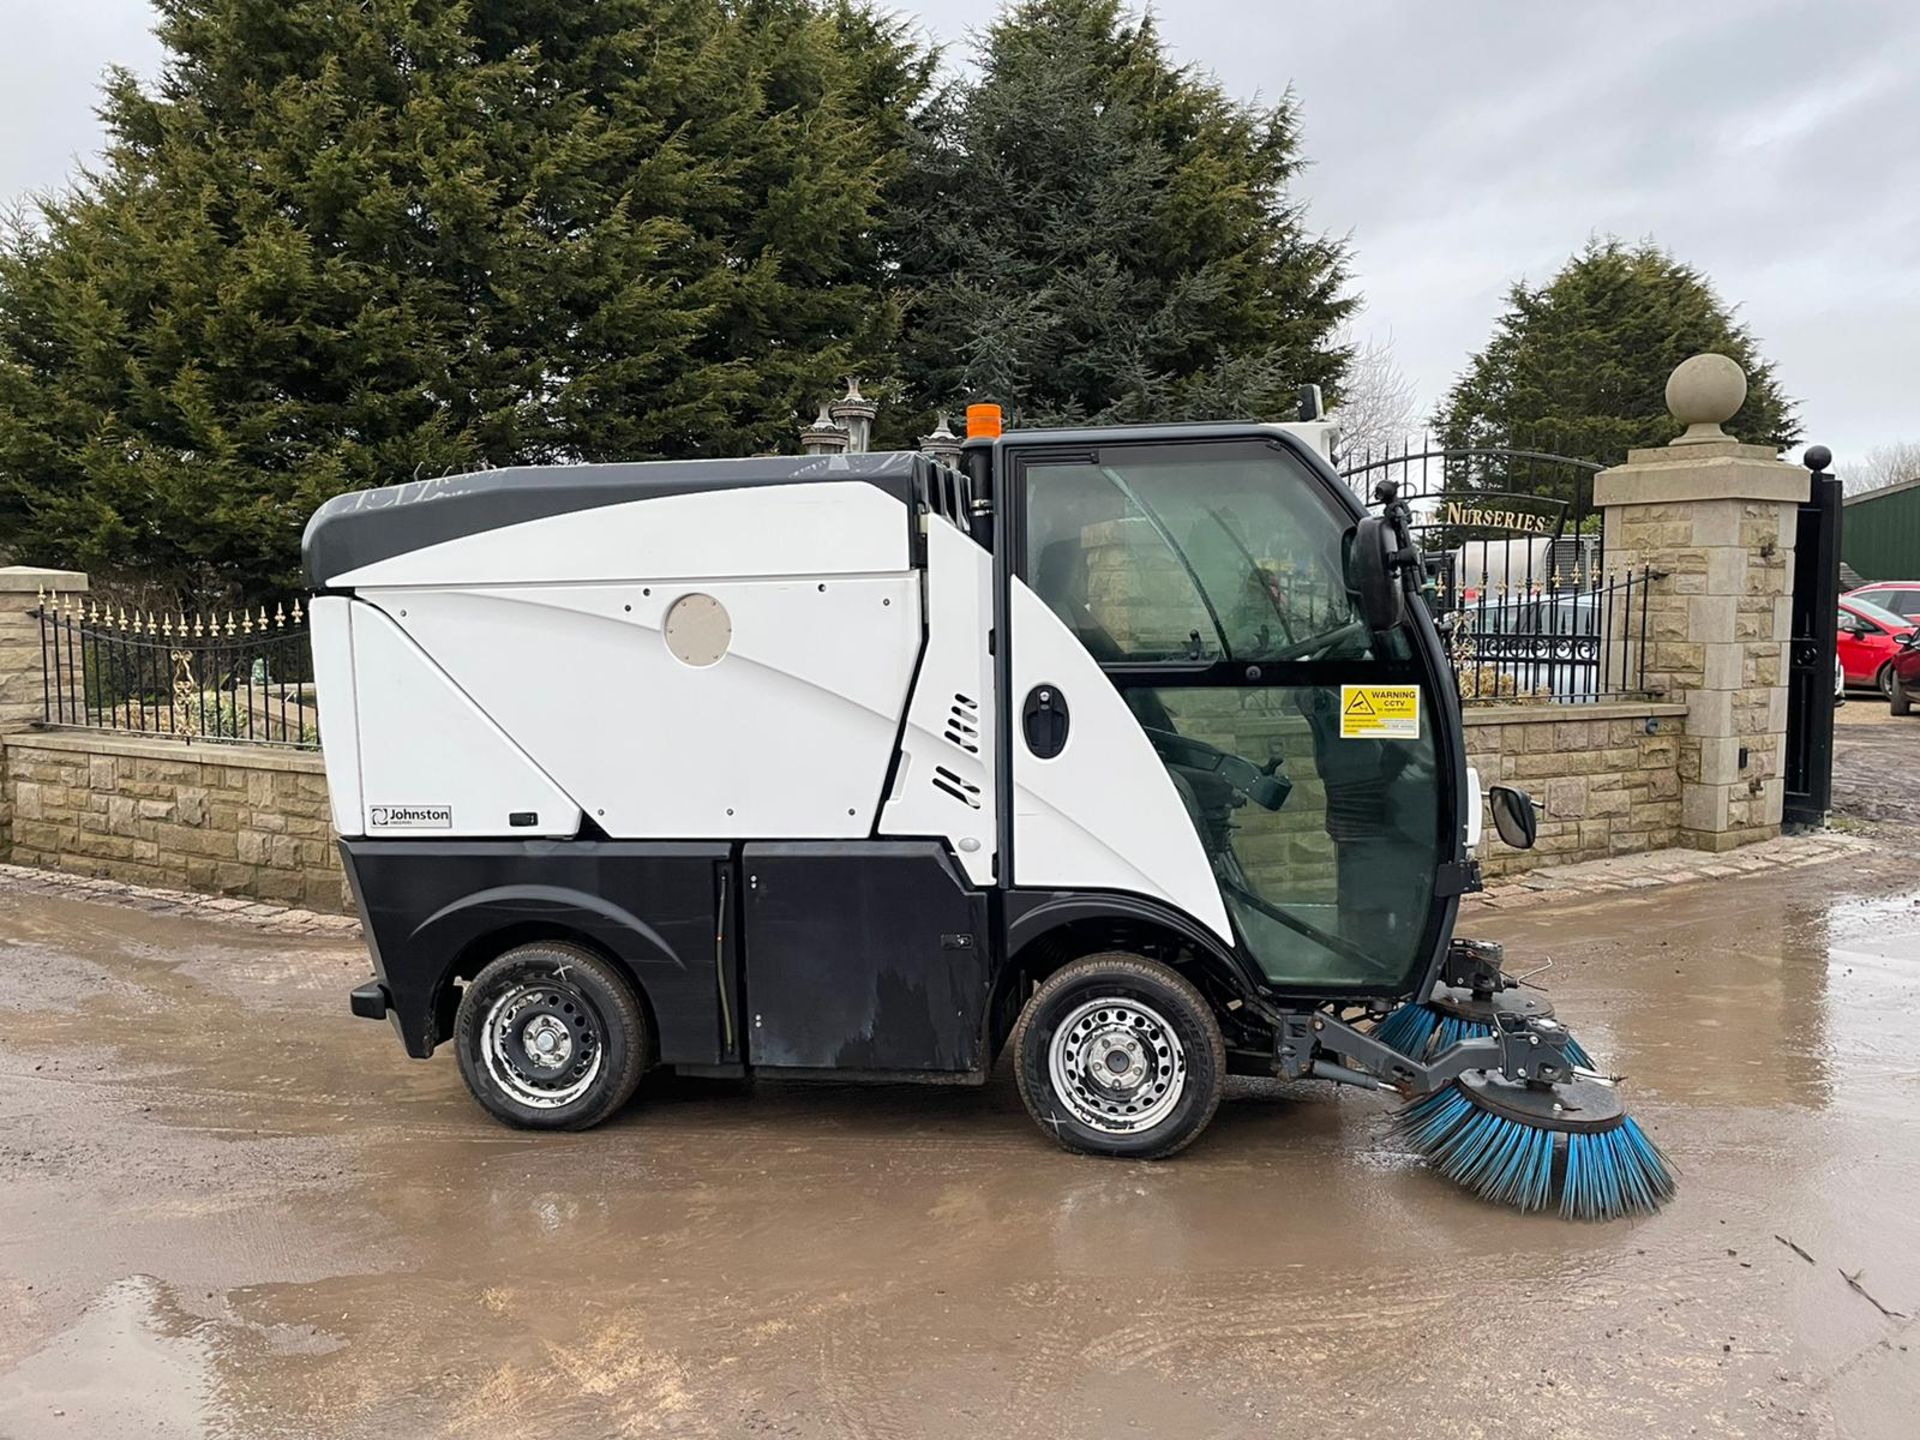 2013/62 REG JOHNSTON SWEEPER / STREET CLEANSING MACHINE, RUNS, DRIVES AND SWEEPS *PLUS VAT* - Image 3 of 11